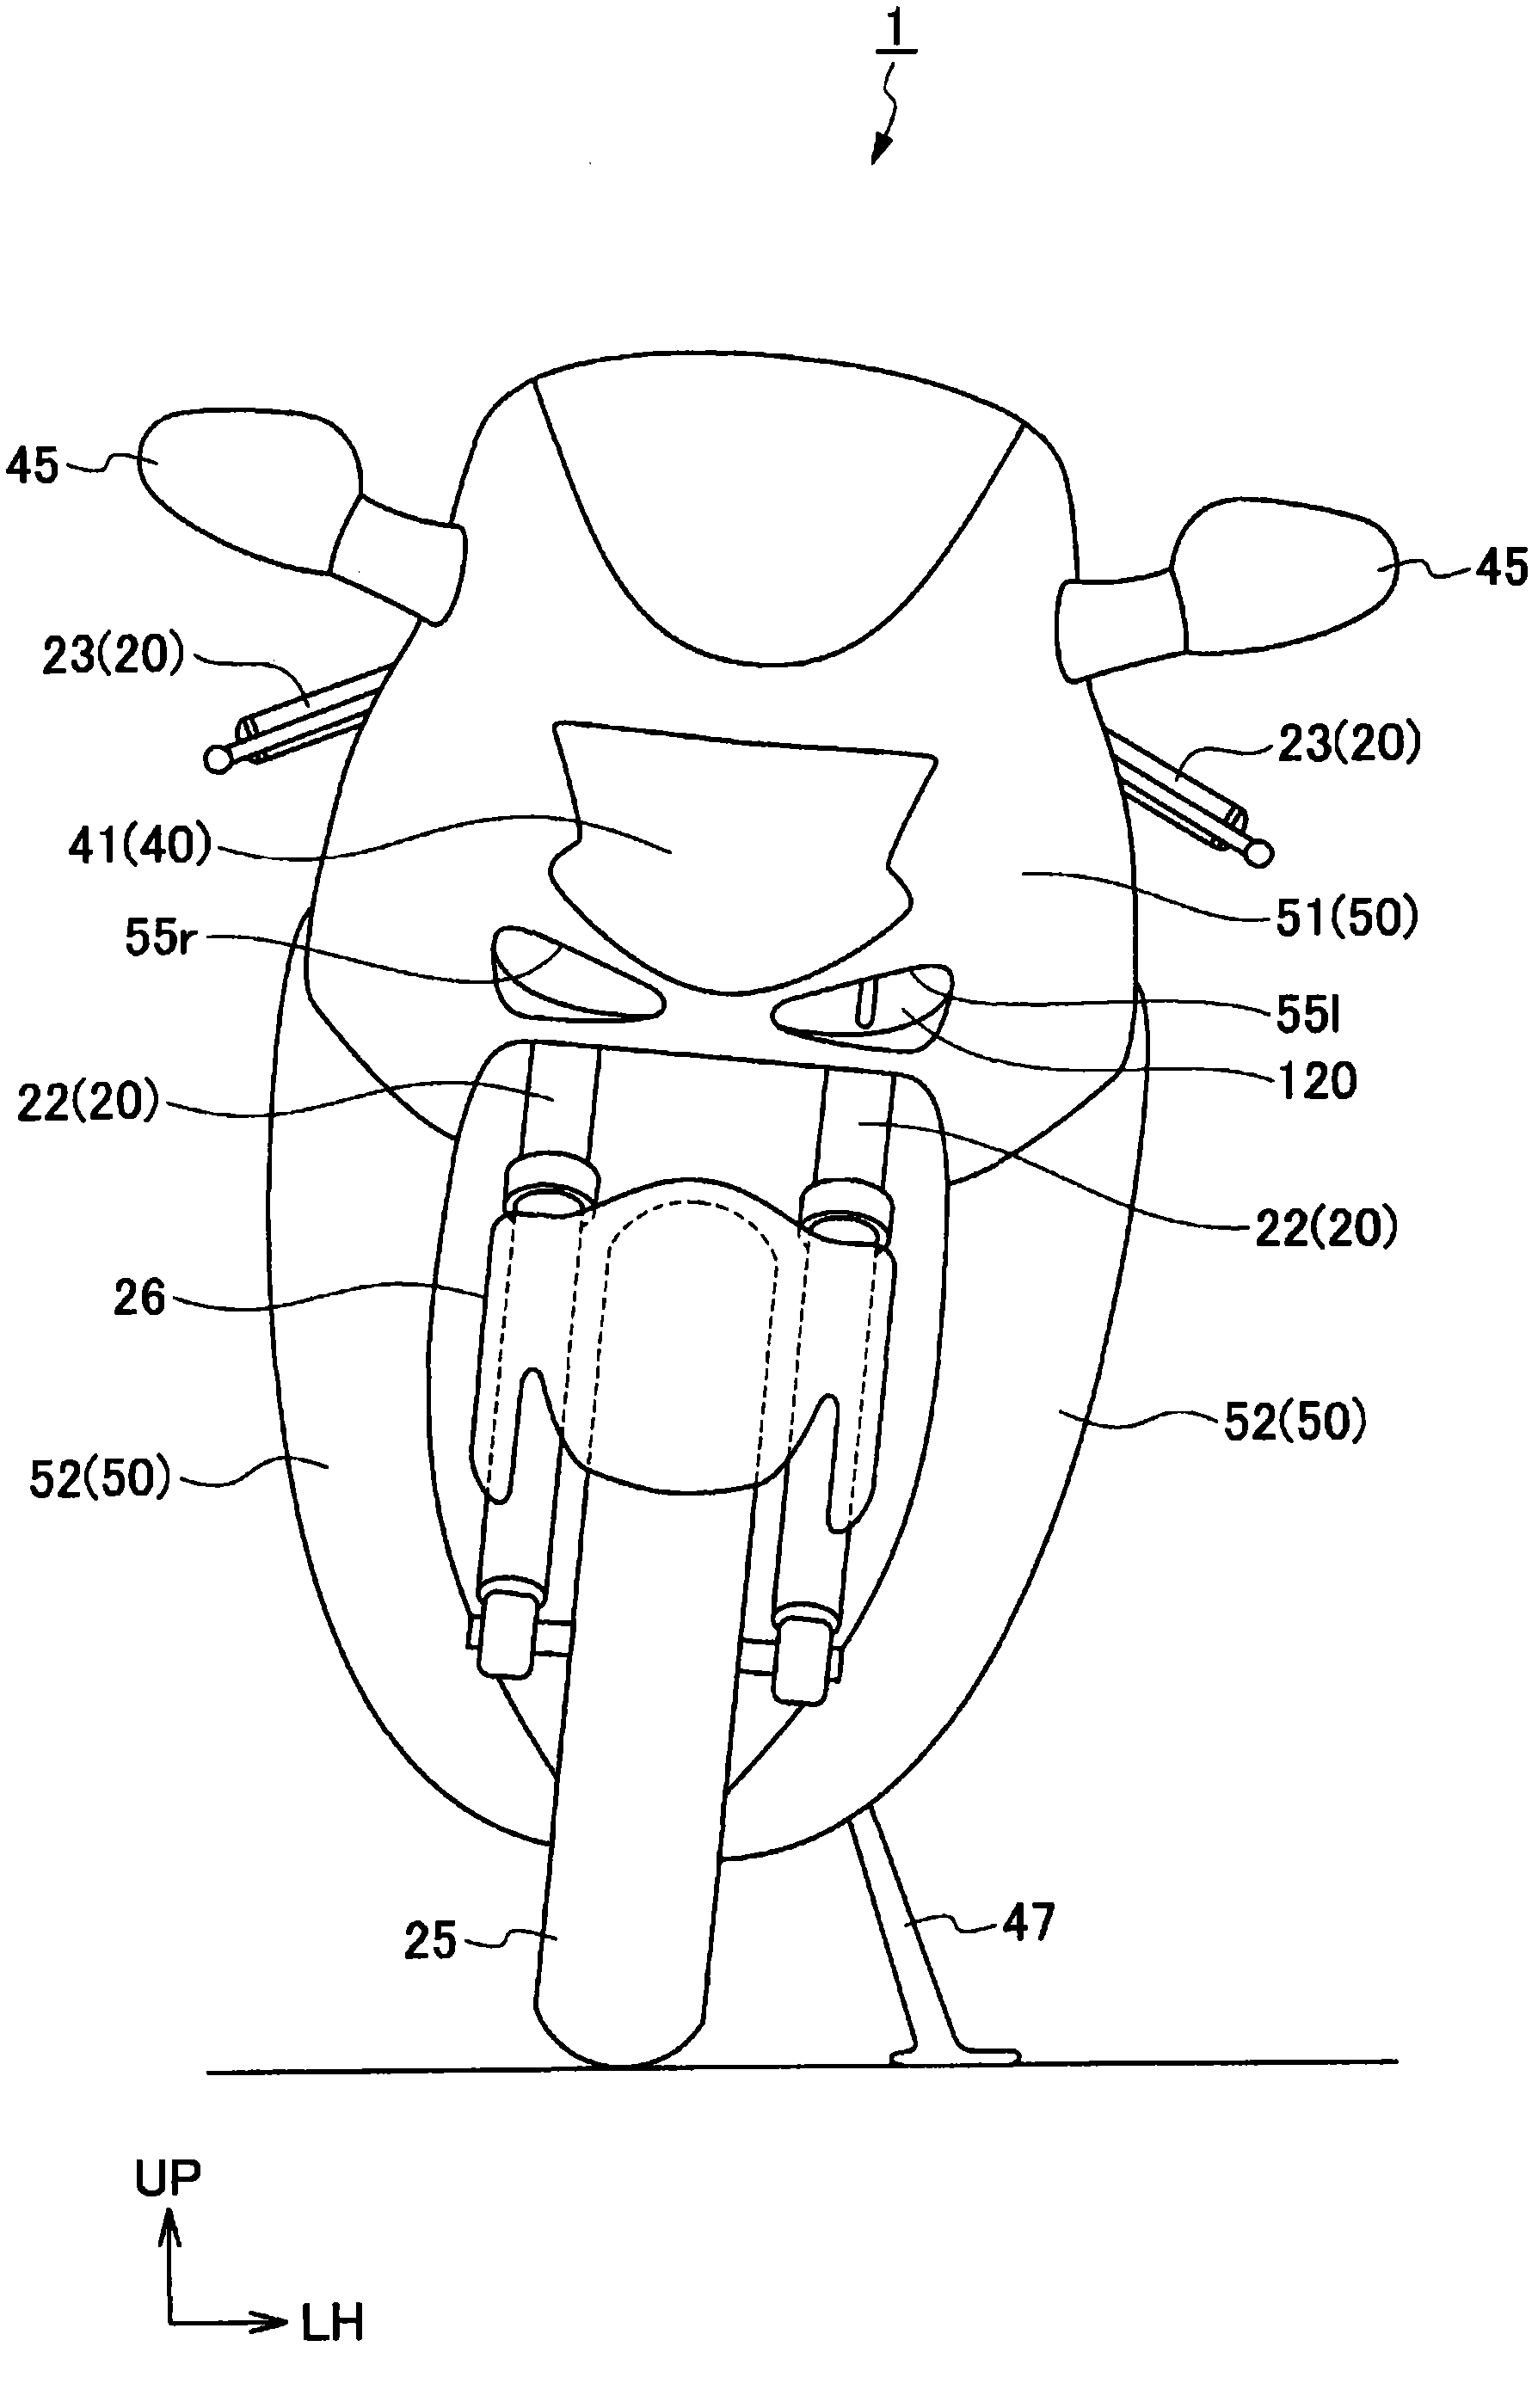 Power connection part receiving structure for straddle type vehicle